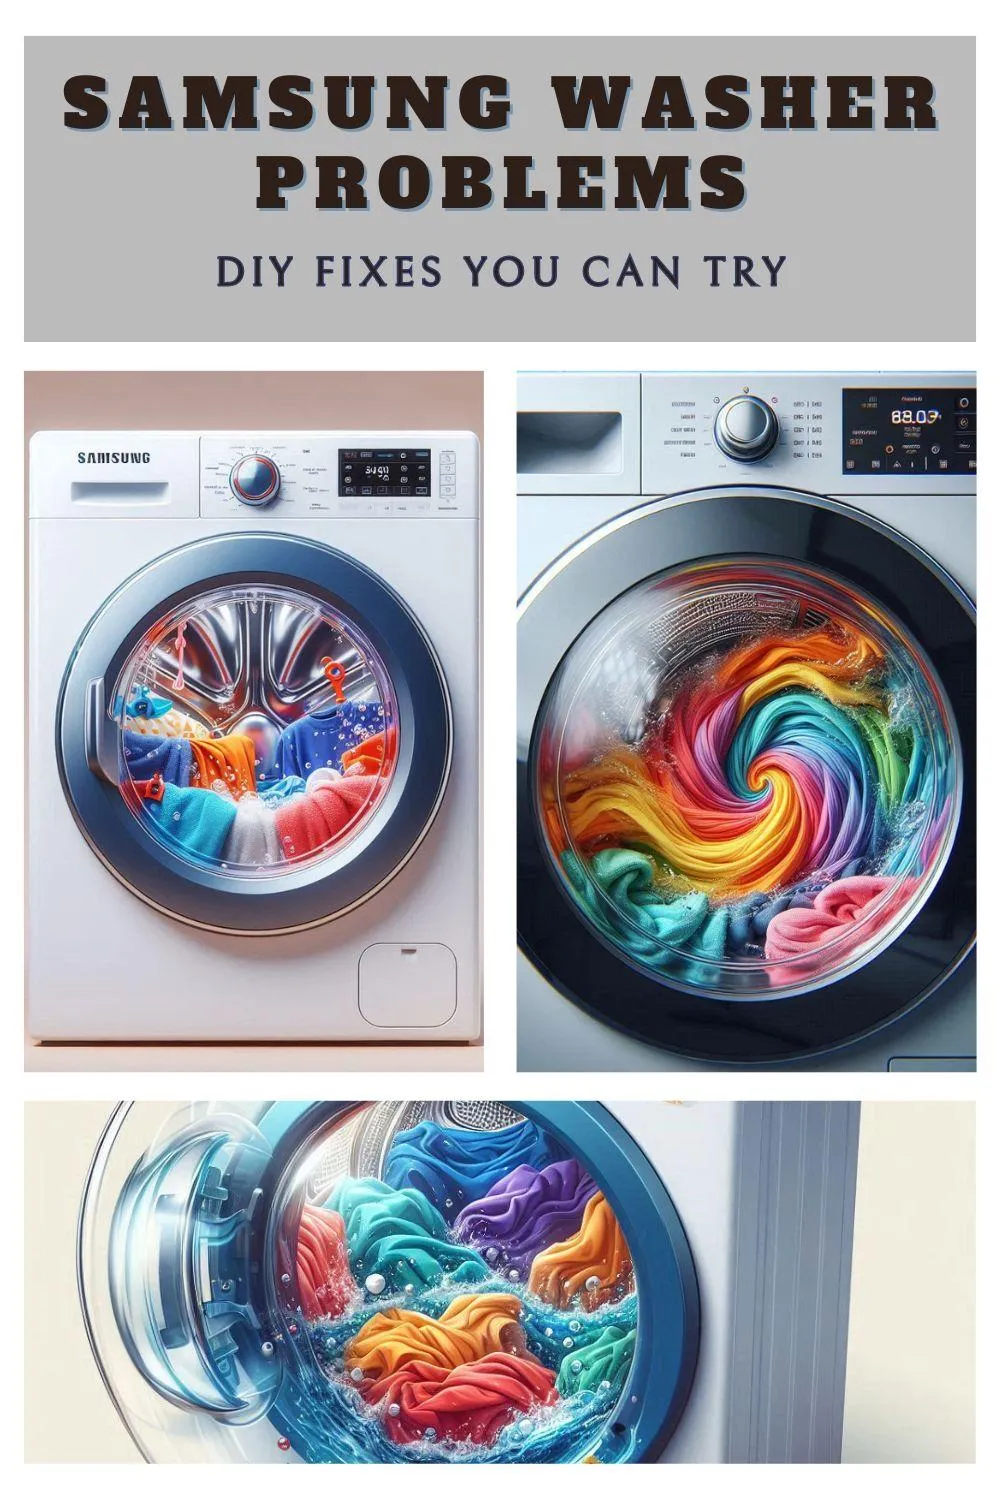 Top 7 Samsung Washer Problems and How to Fix Them